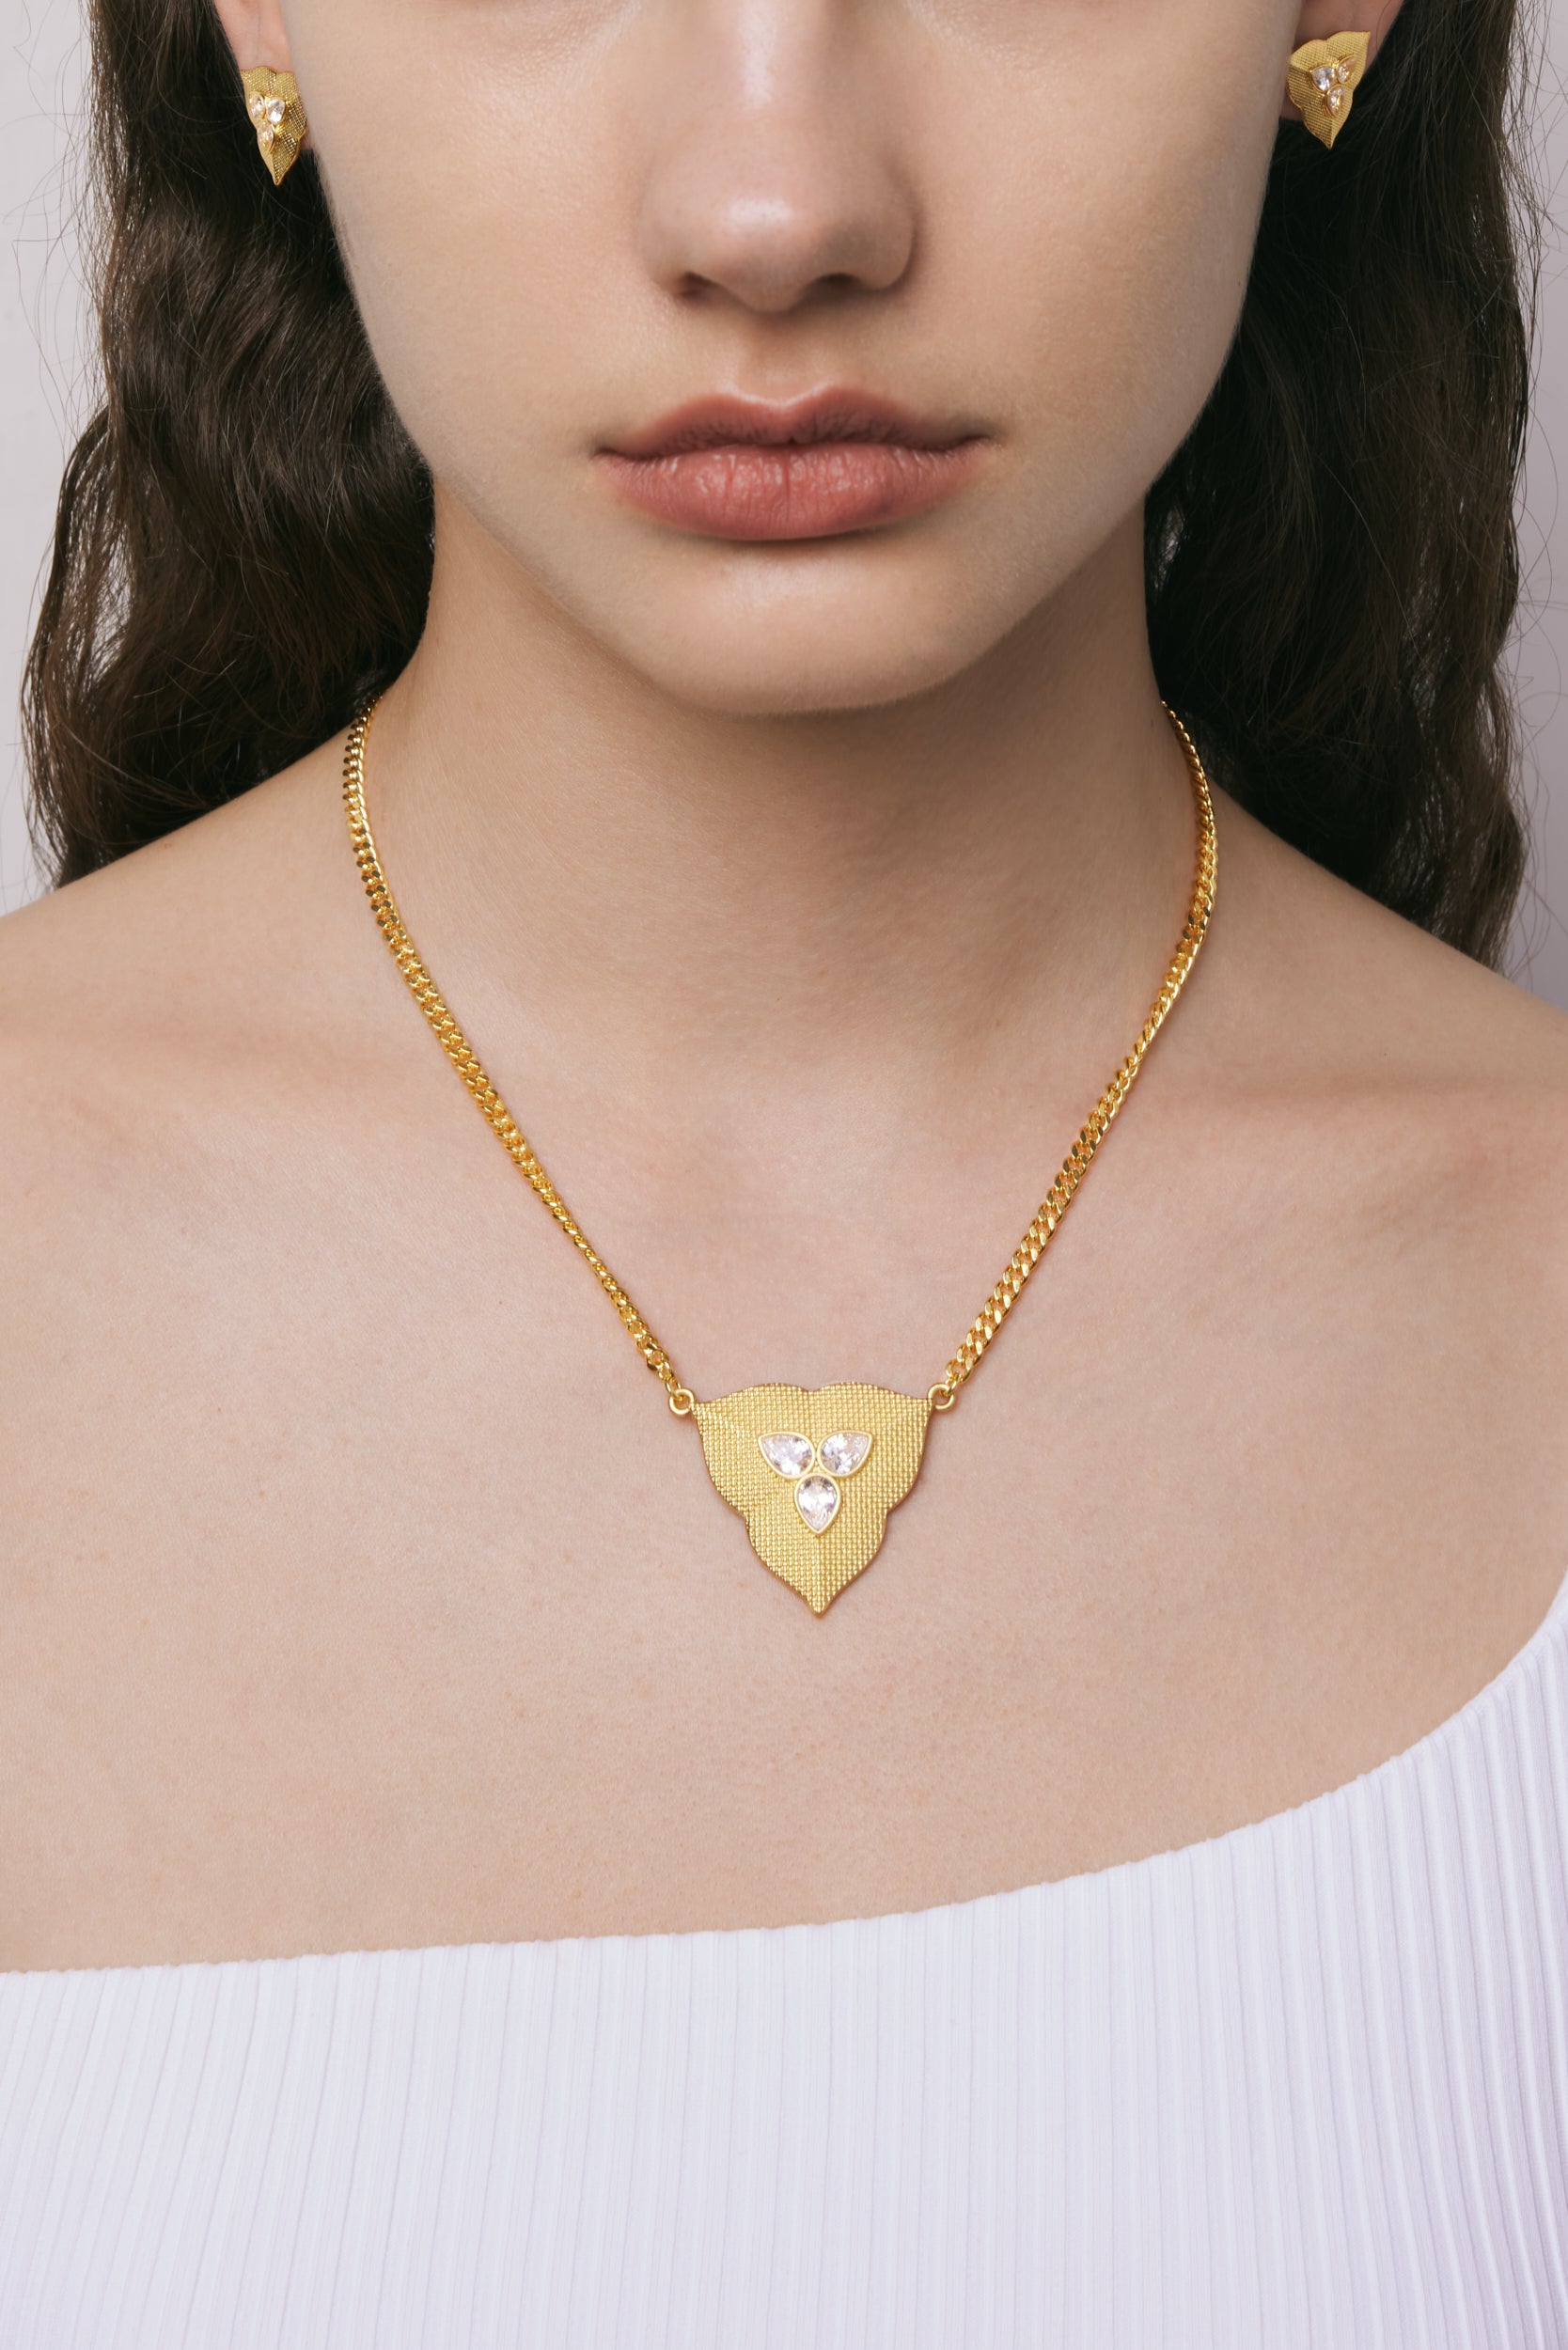 Leaf Pendant Necklace - 18ct Gold Plated & White Zircon